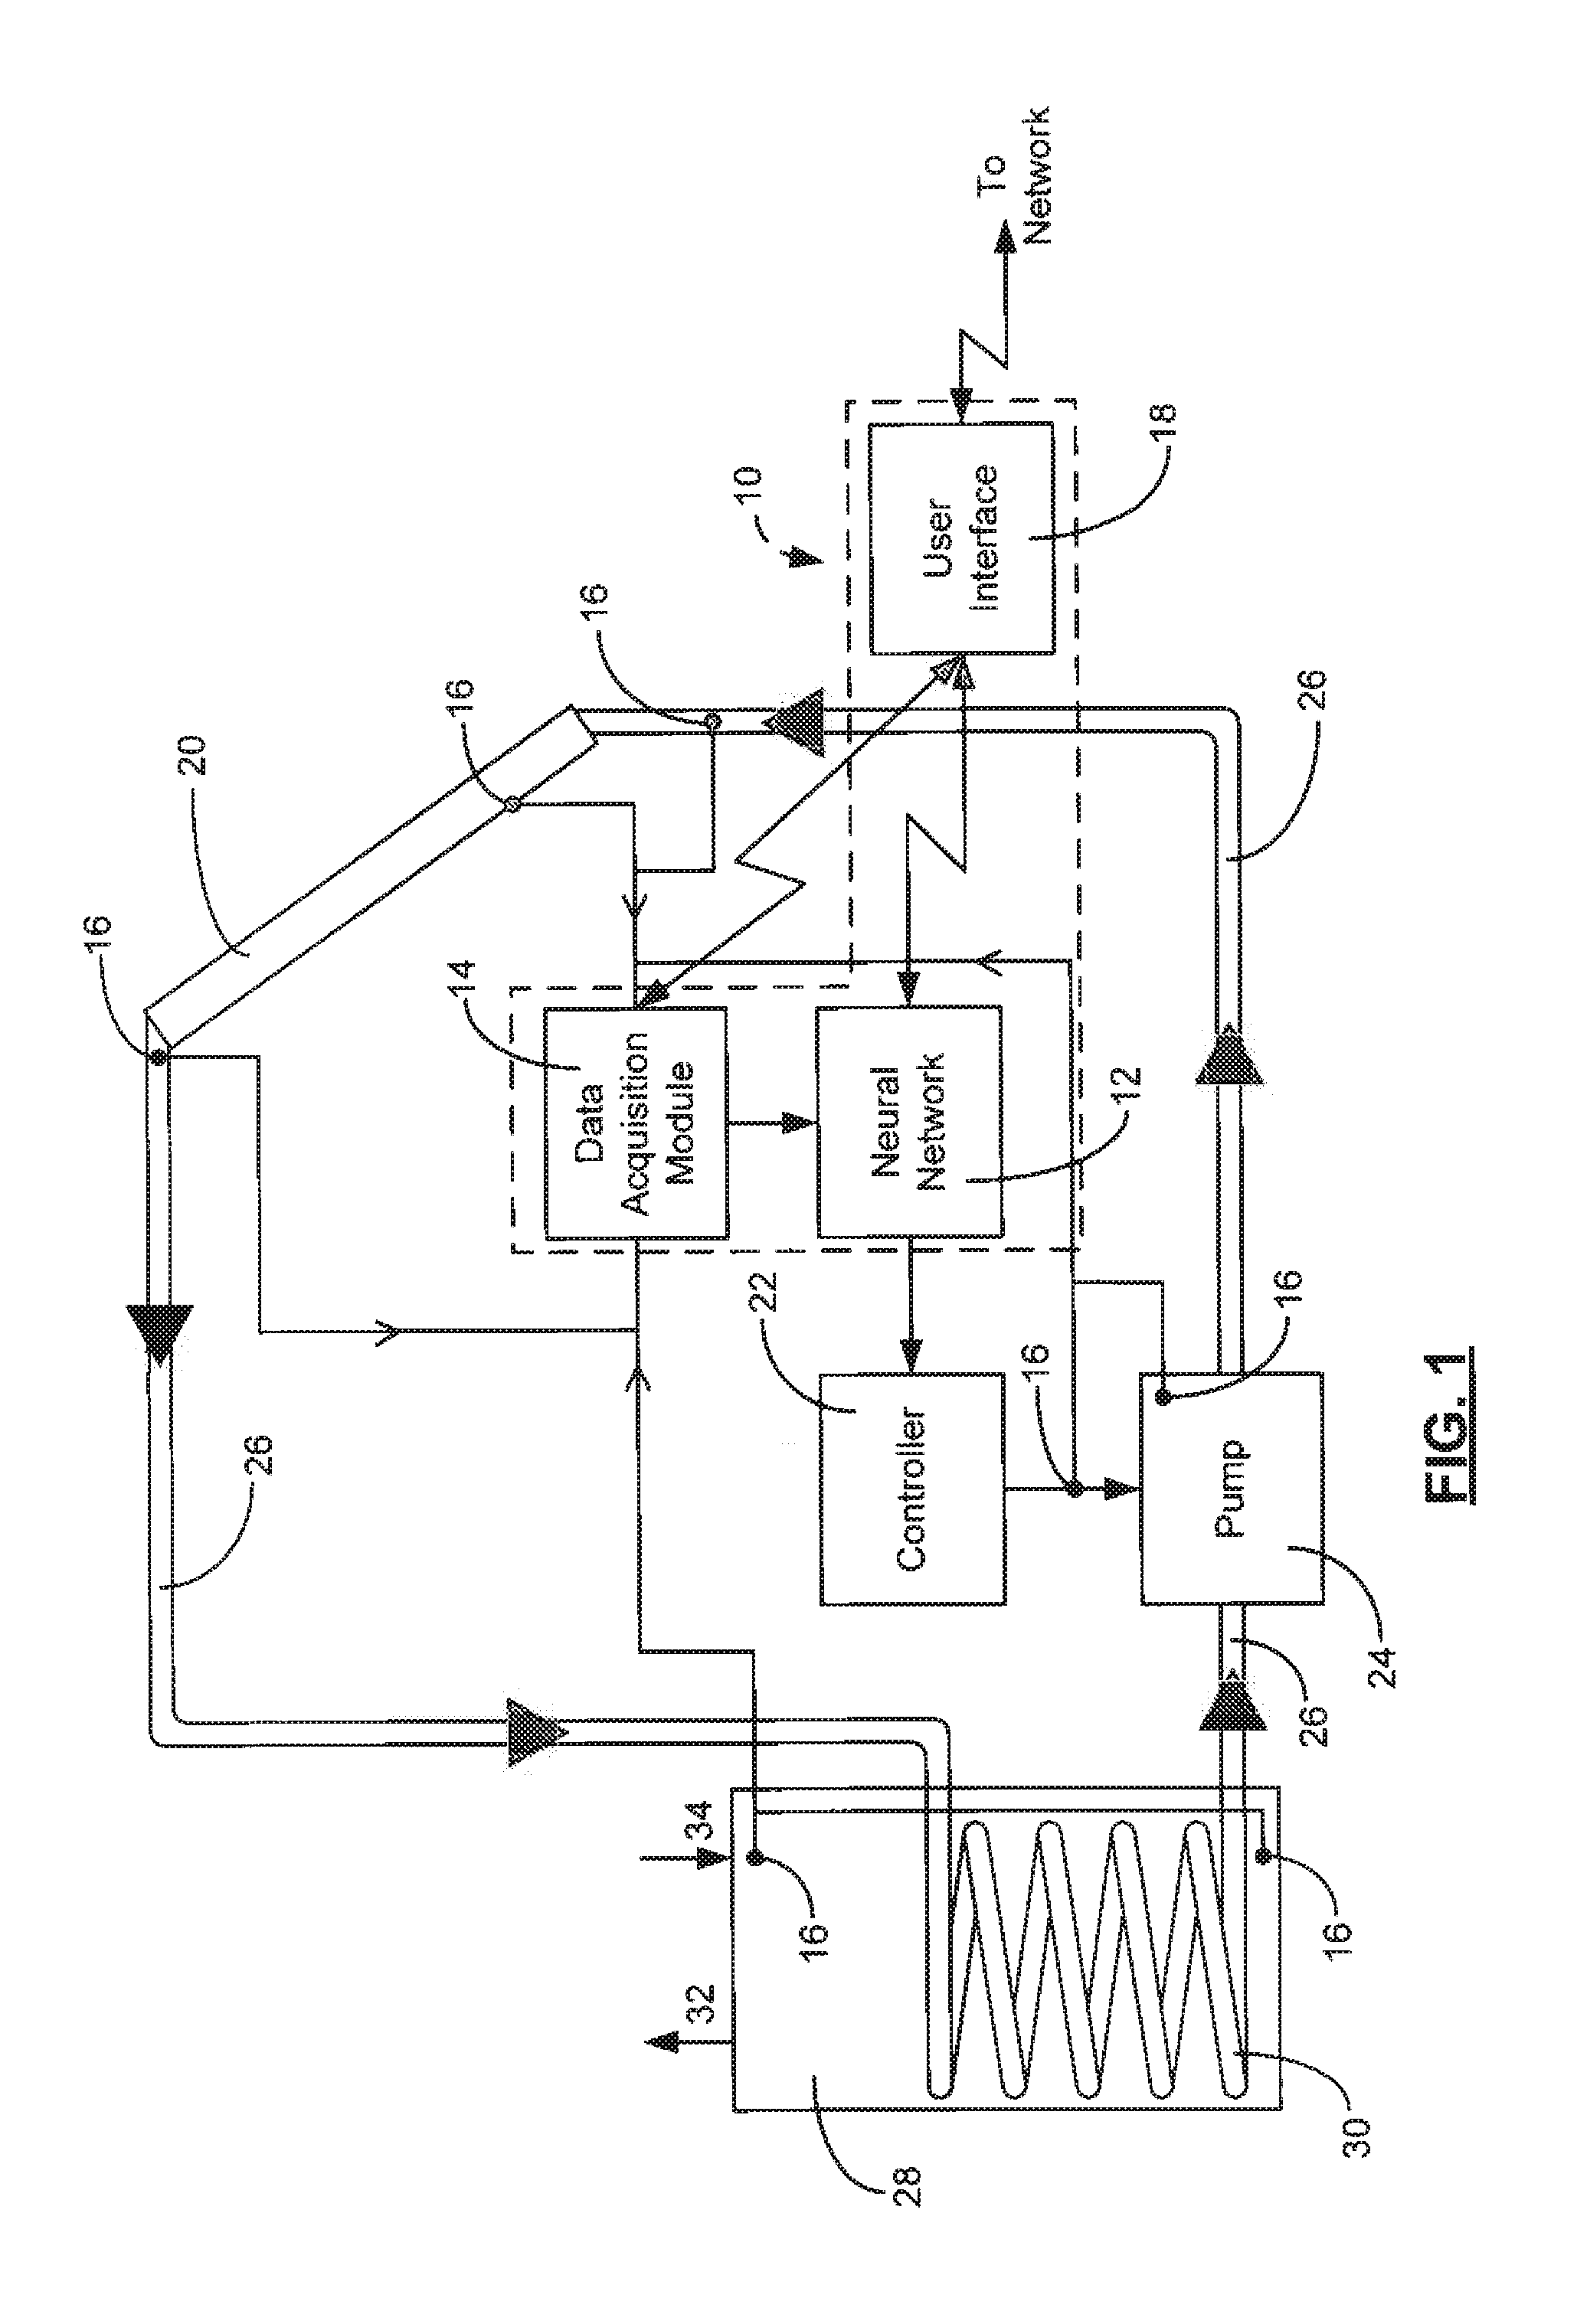 Neural network fault detection system and associated methods